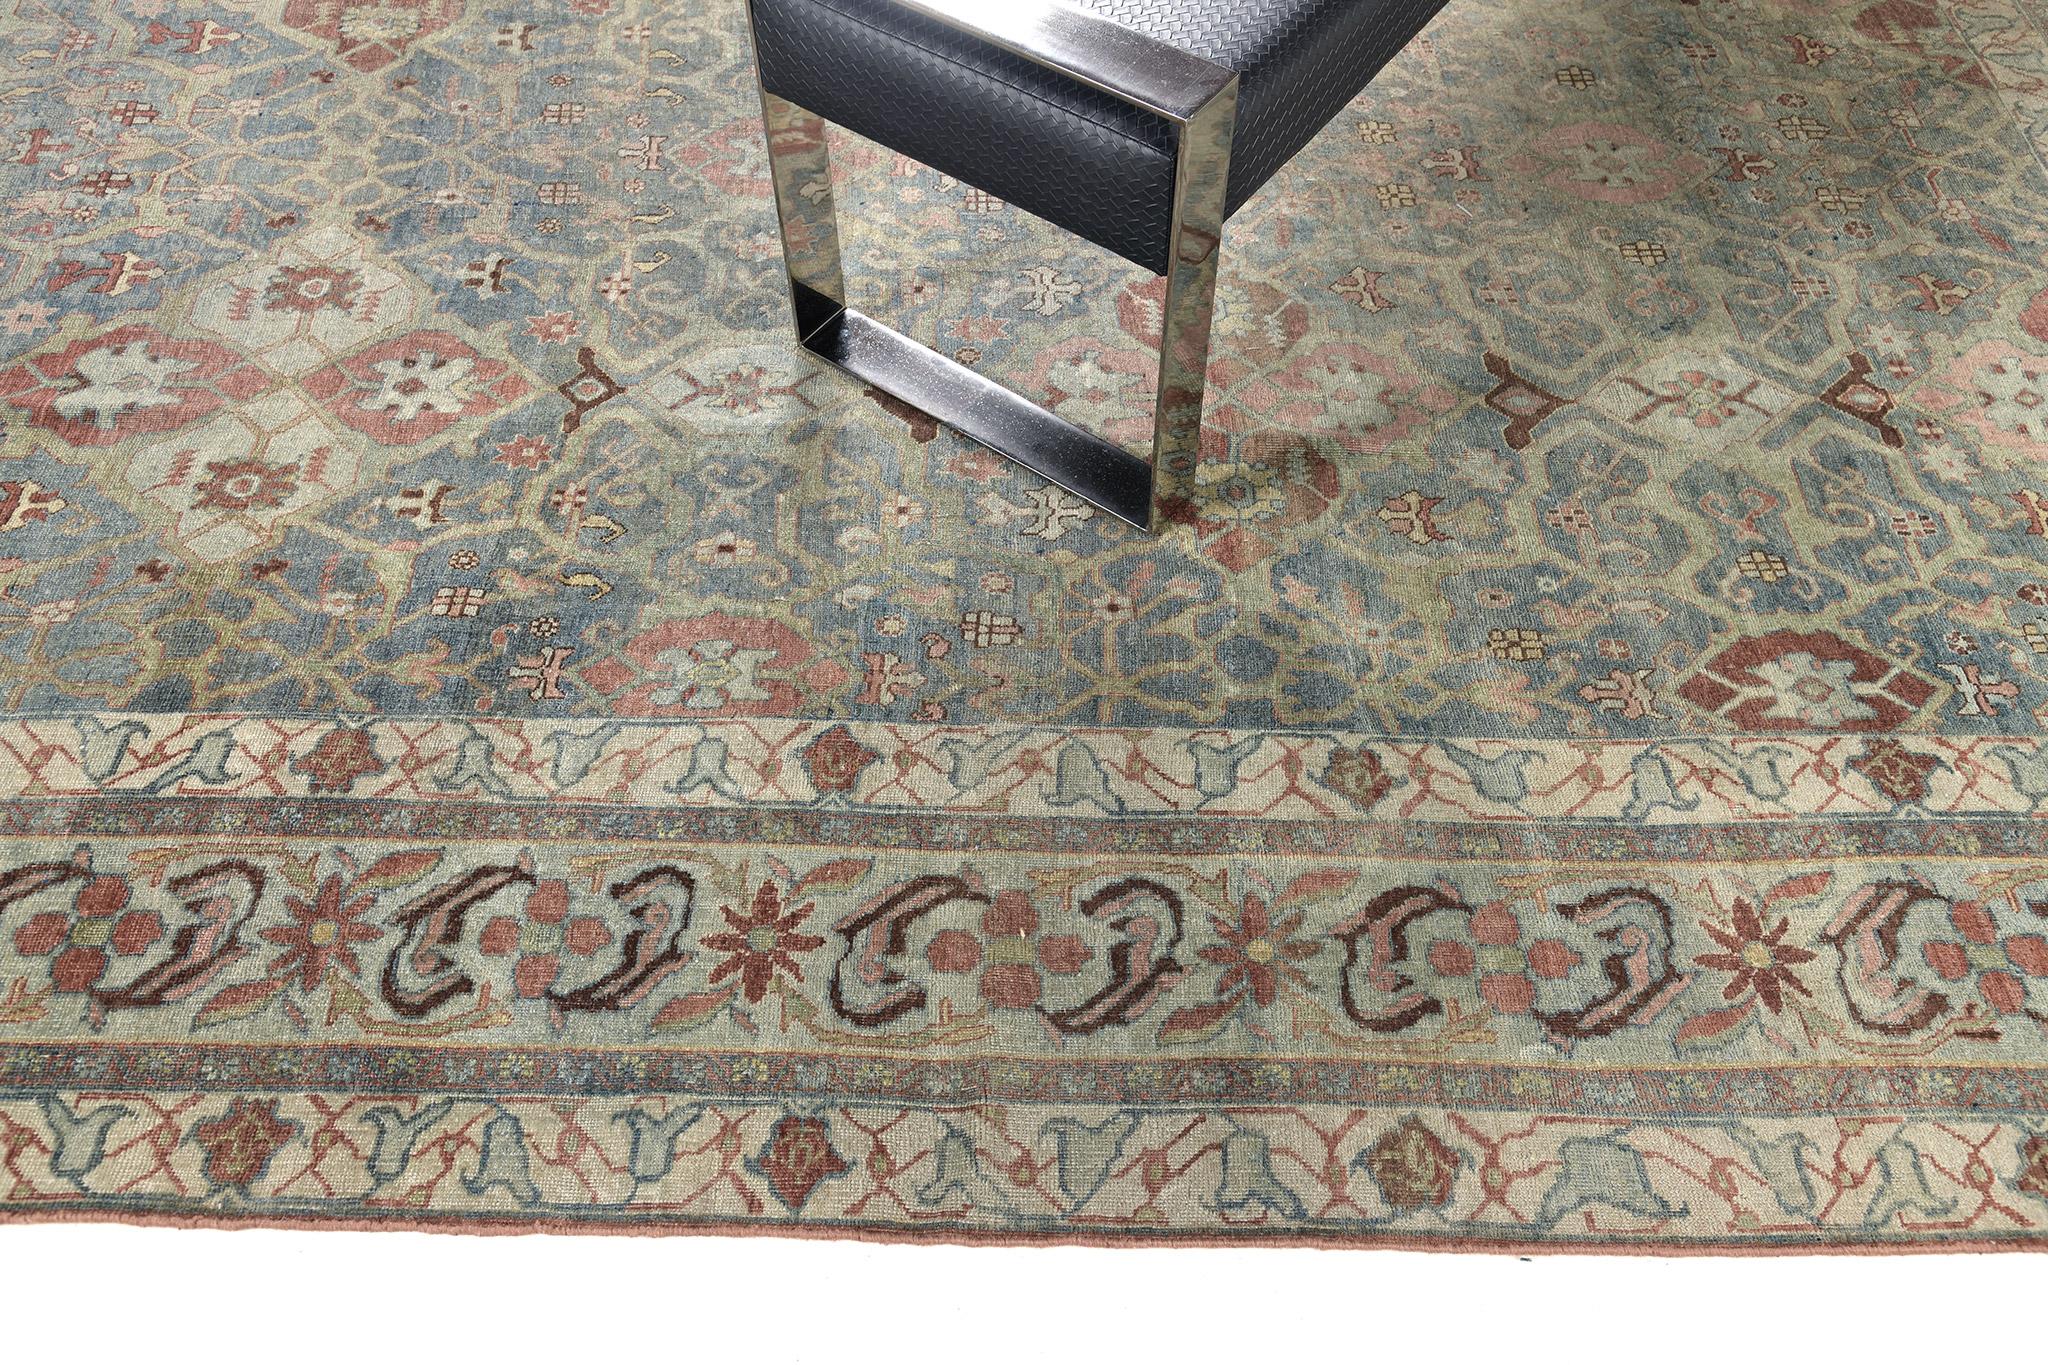 A graceful Antique Persian Bidjar rug that features an array of herati patterns composed of diverse botanical elements in the magnificent tones of cerulean blue, rust, ivory and sage green. This captivating rug charms effortlessly with its dainty